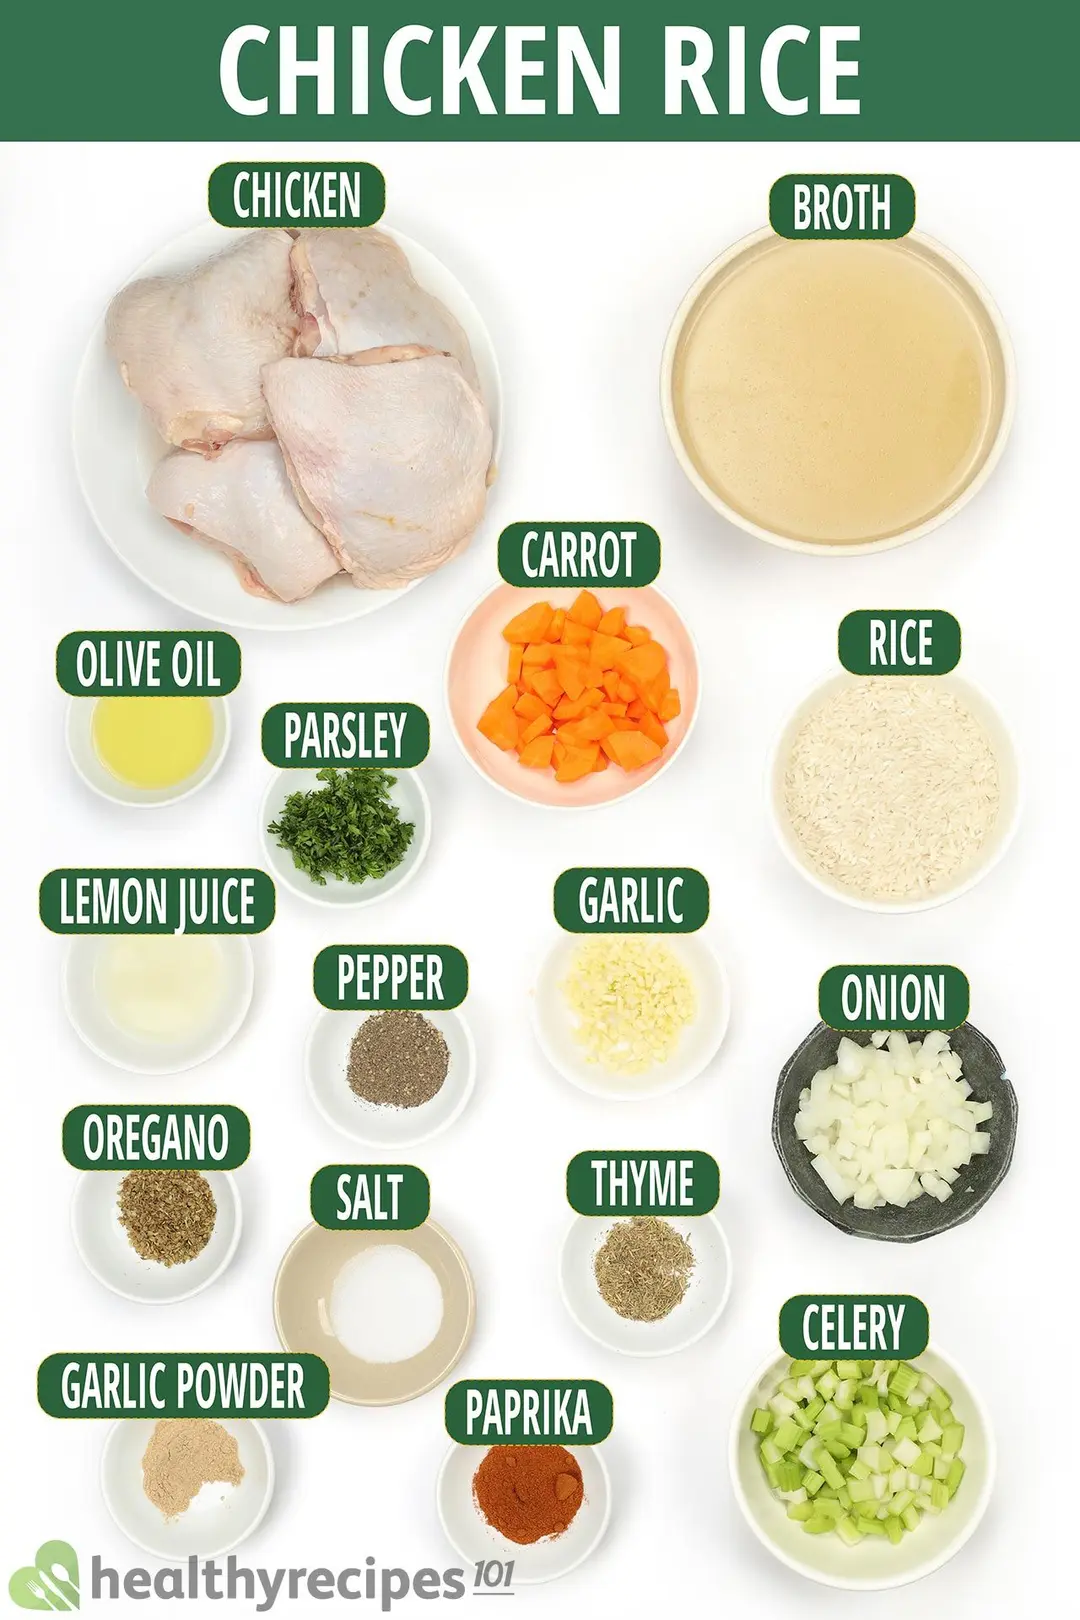 Ingredients of this recipe: chicken thighs, uncooked rice, carrots, celery, onions, chicken broth, and other seasonings